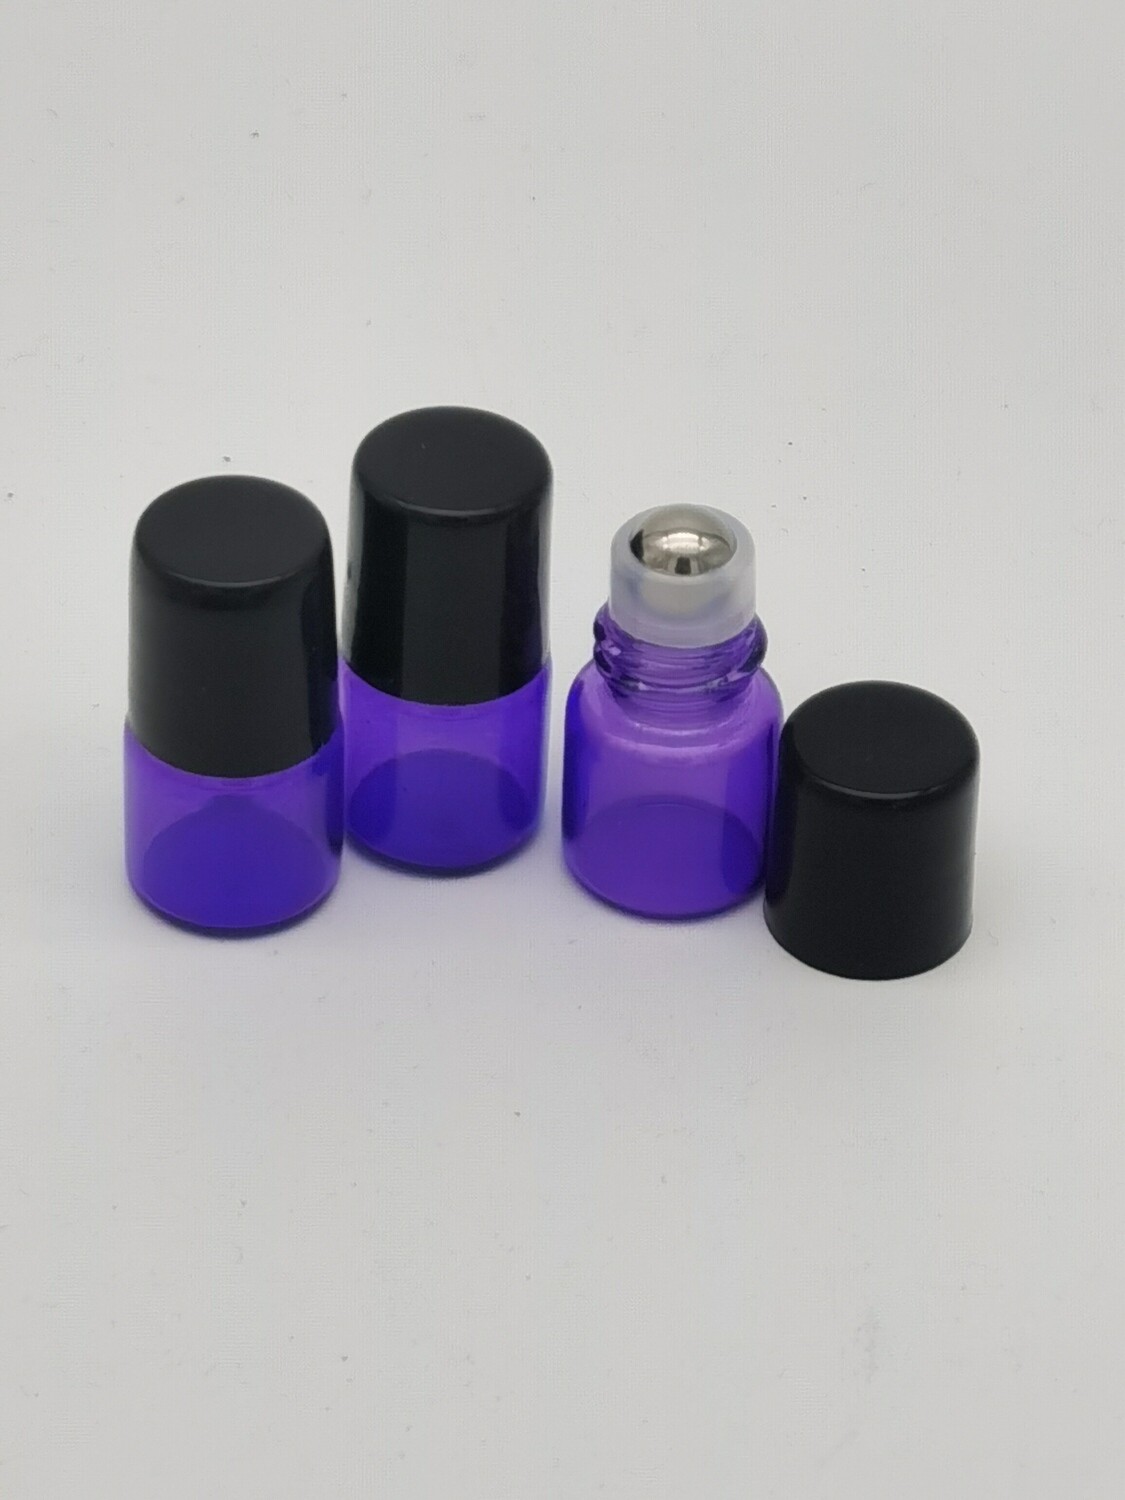 1ml Cobalt Blue Glass Rollon with Metal Roller Ball (White Housing) and Black Cap - PACK of 100 Pcs